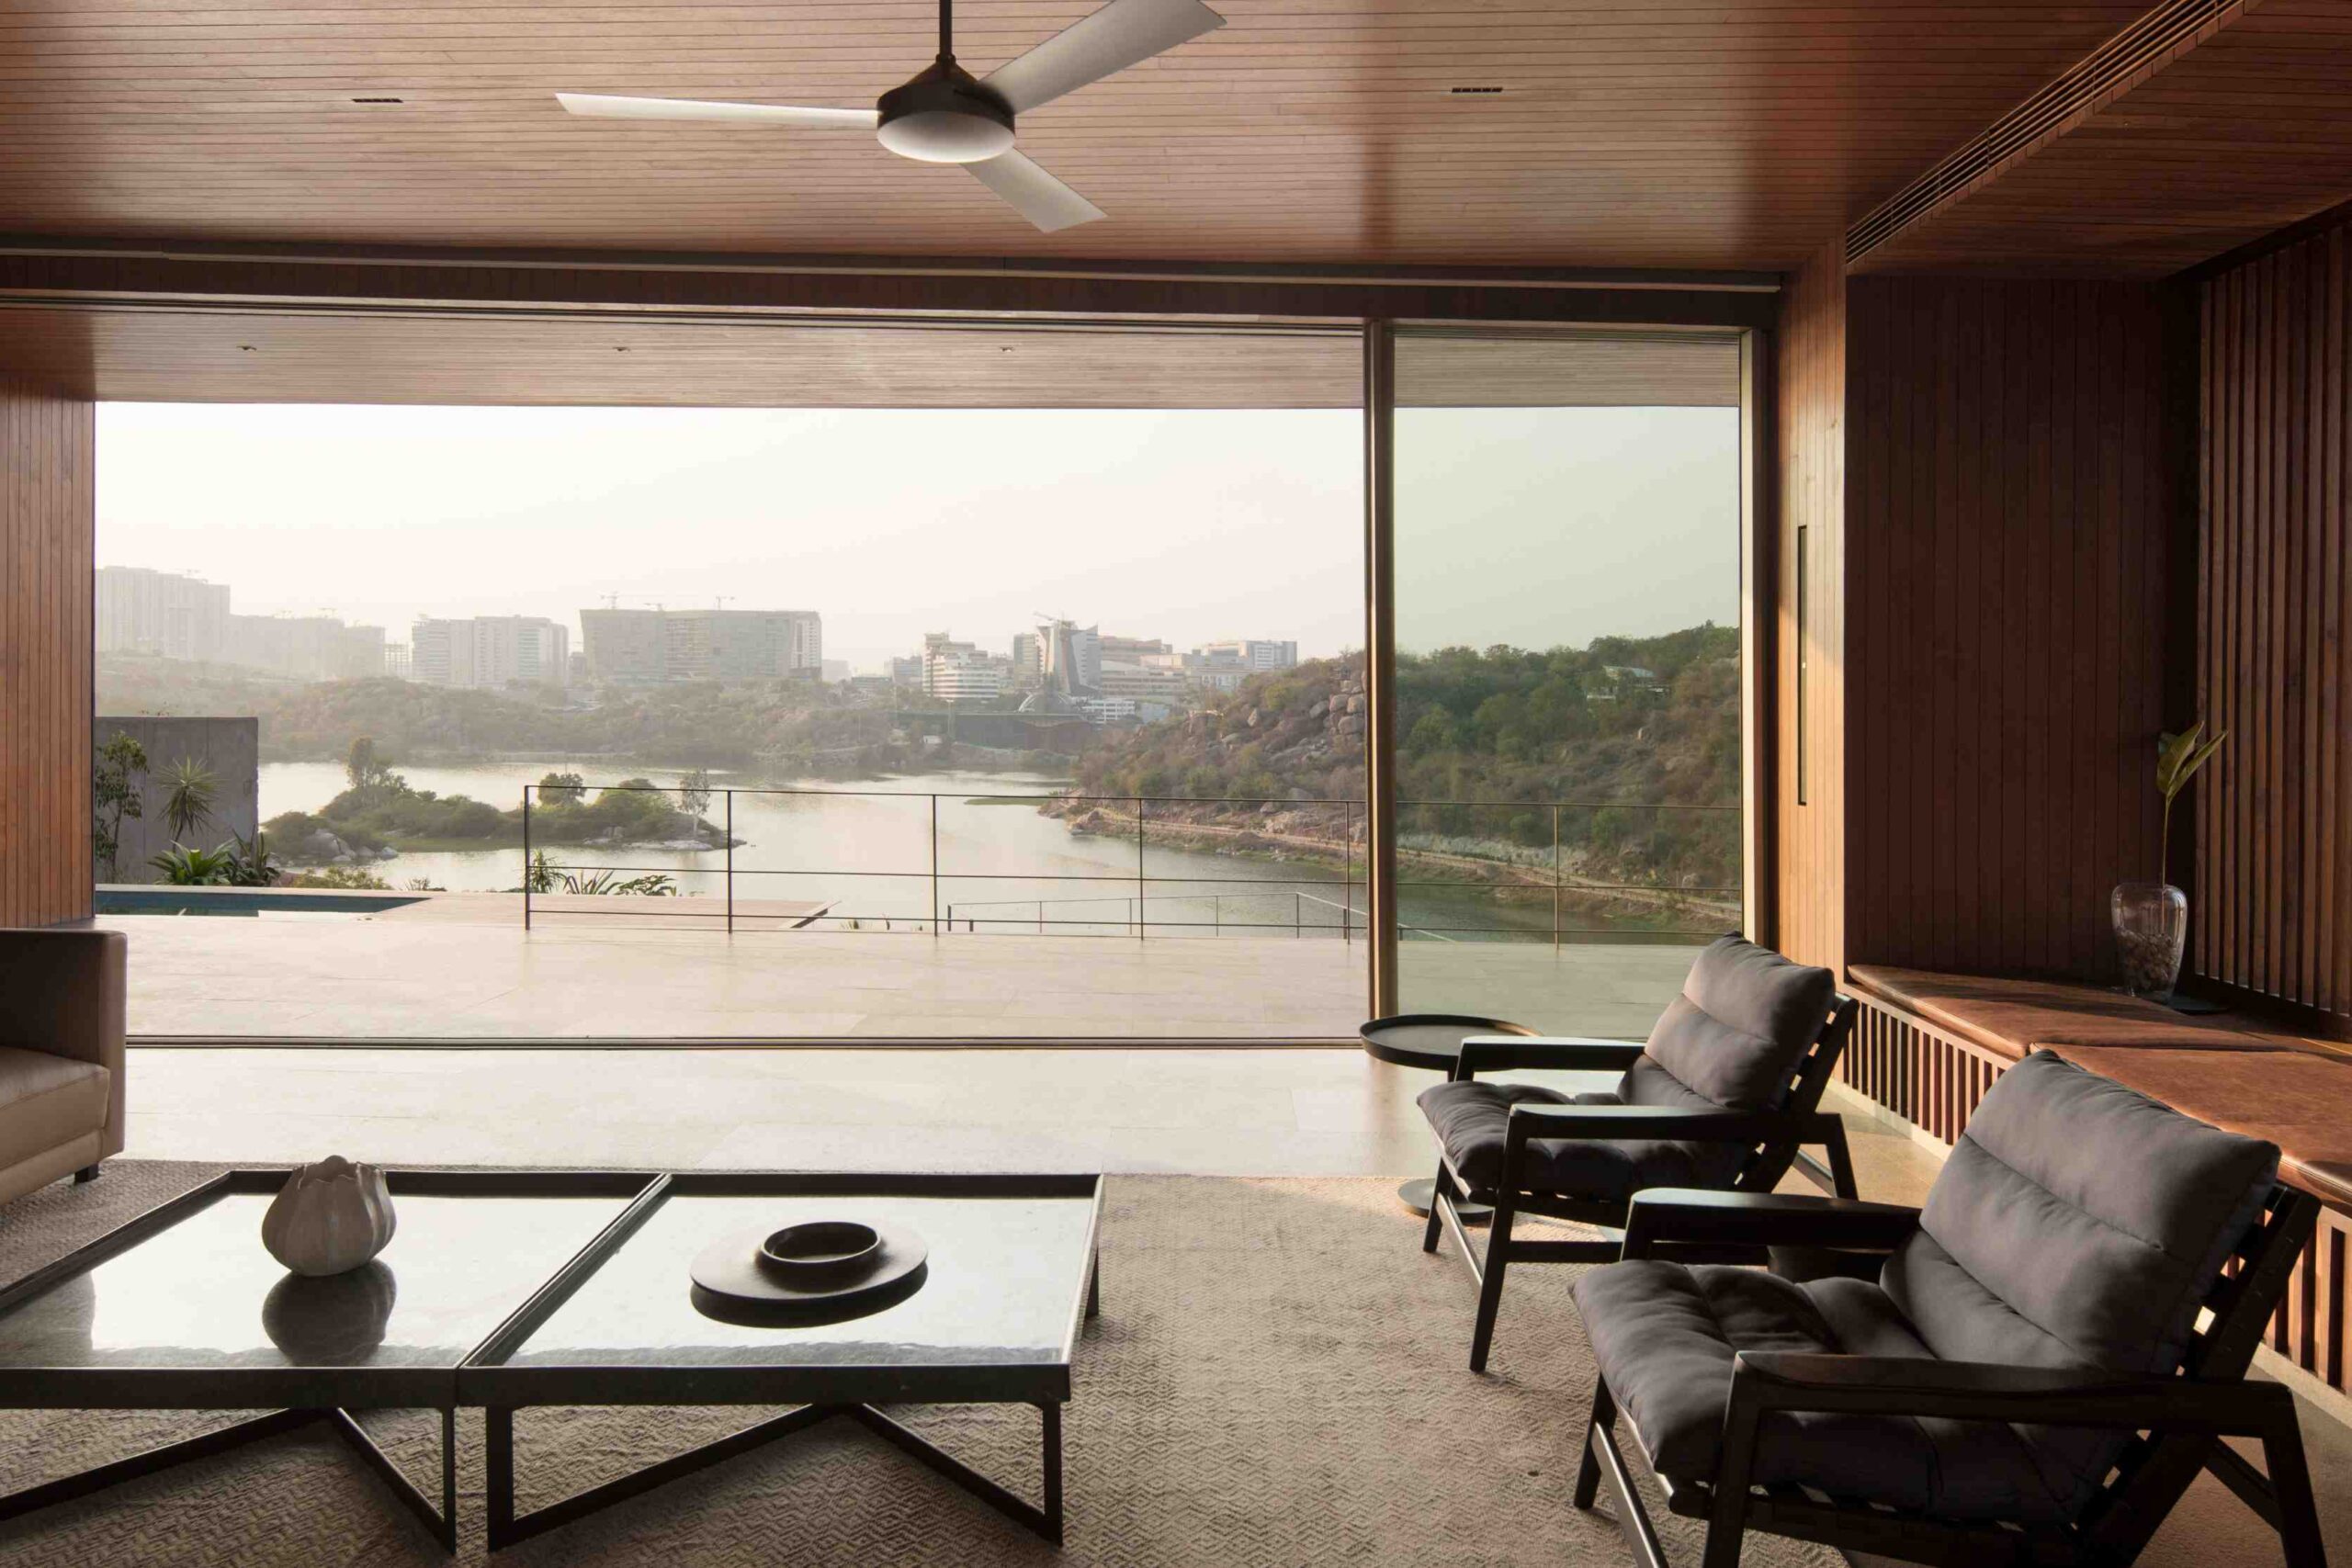 LAKE HOUSE at Hyderabad, Telangana, by Collective Project 29